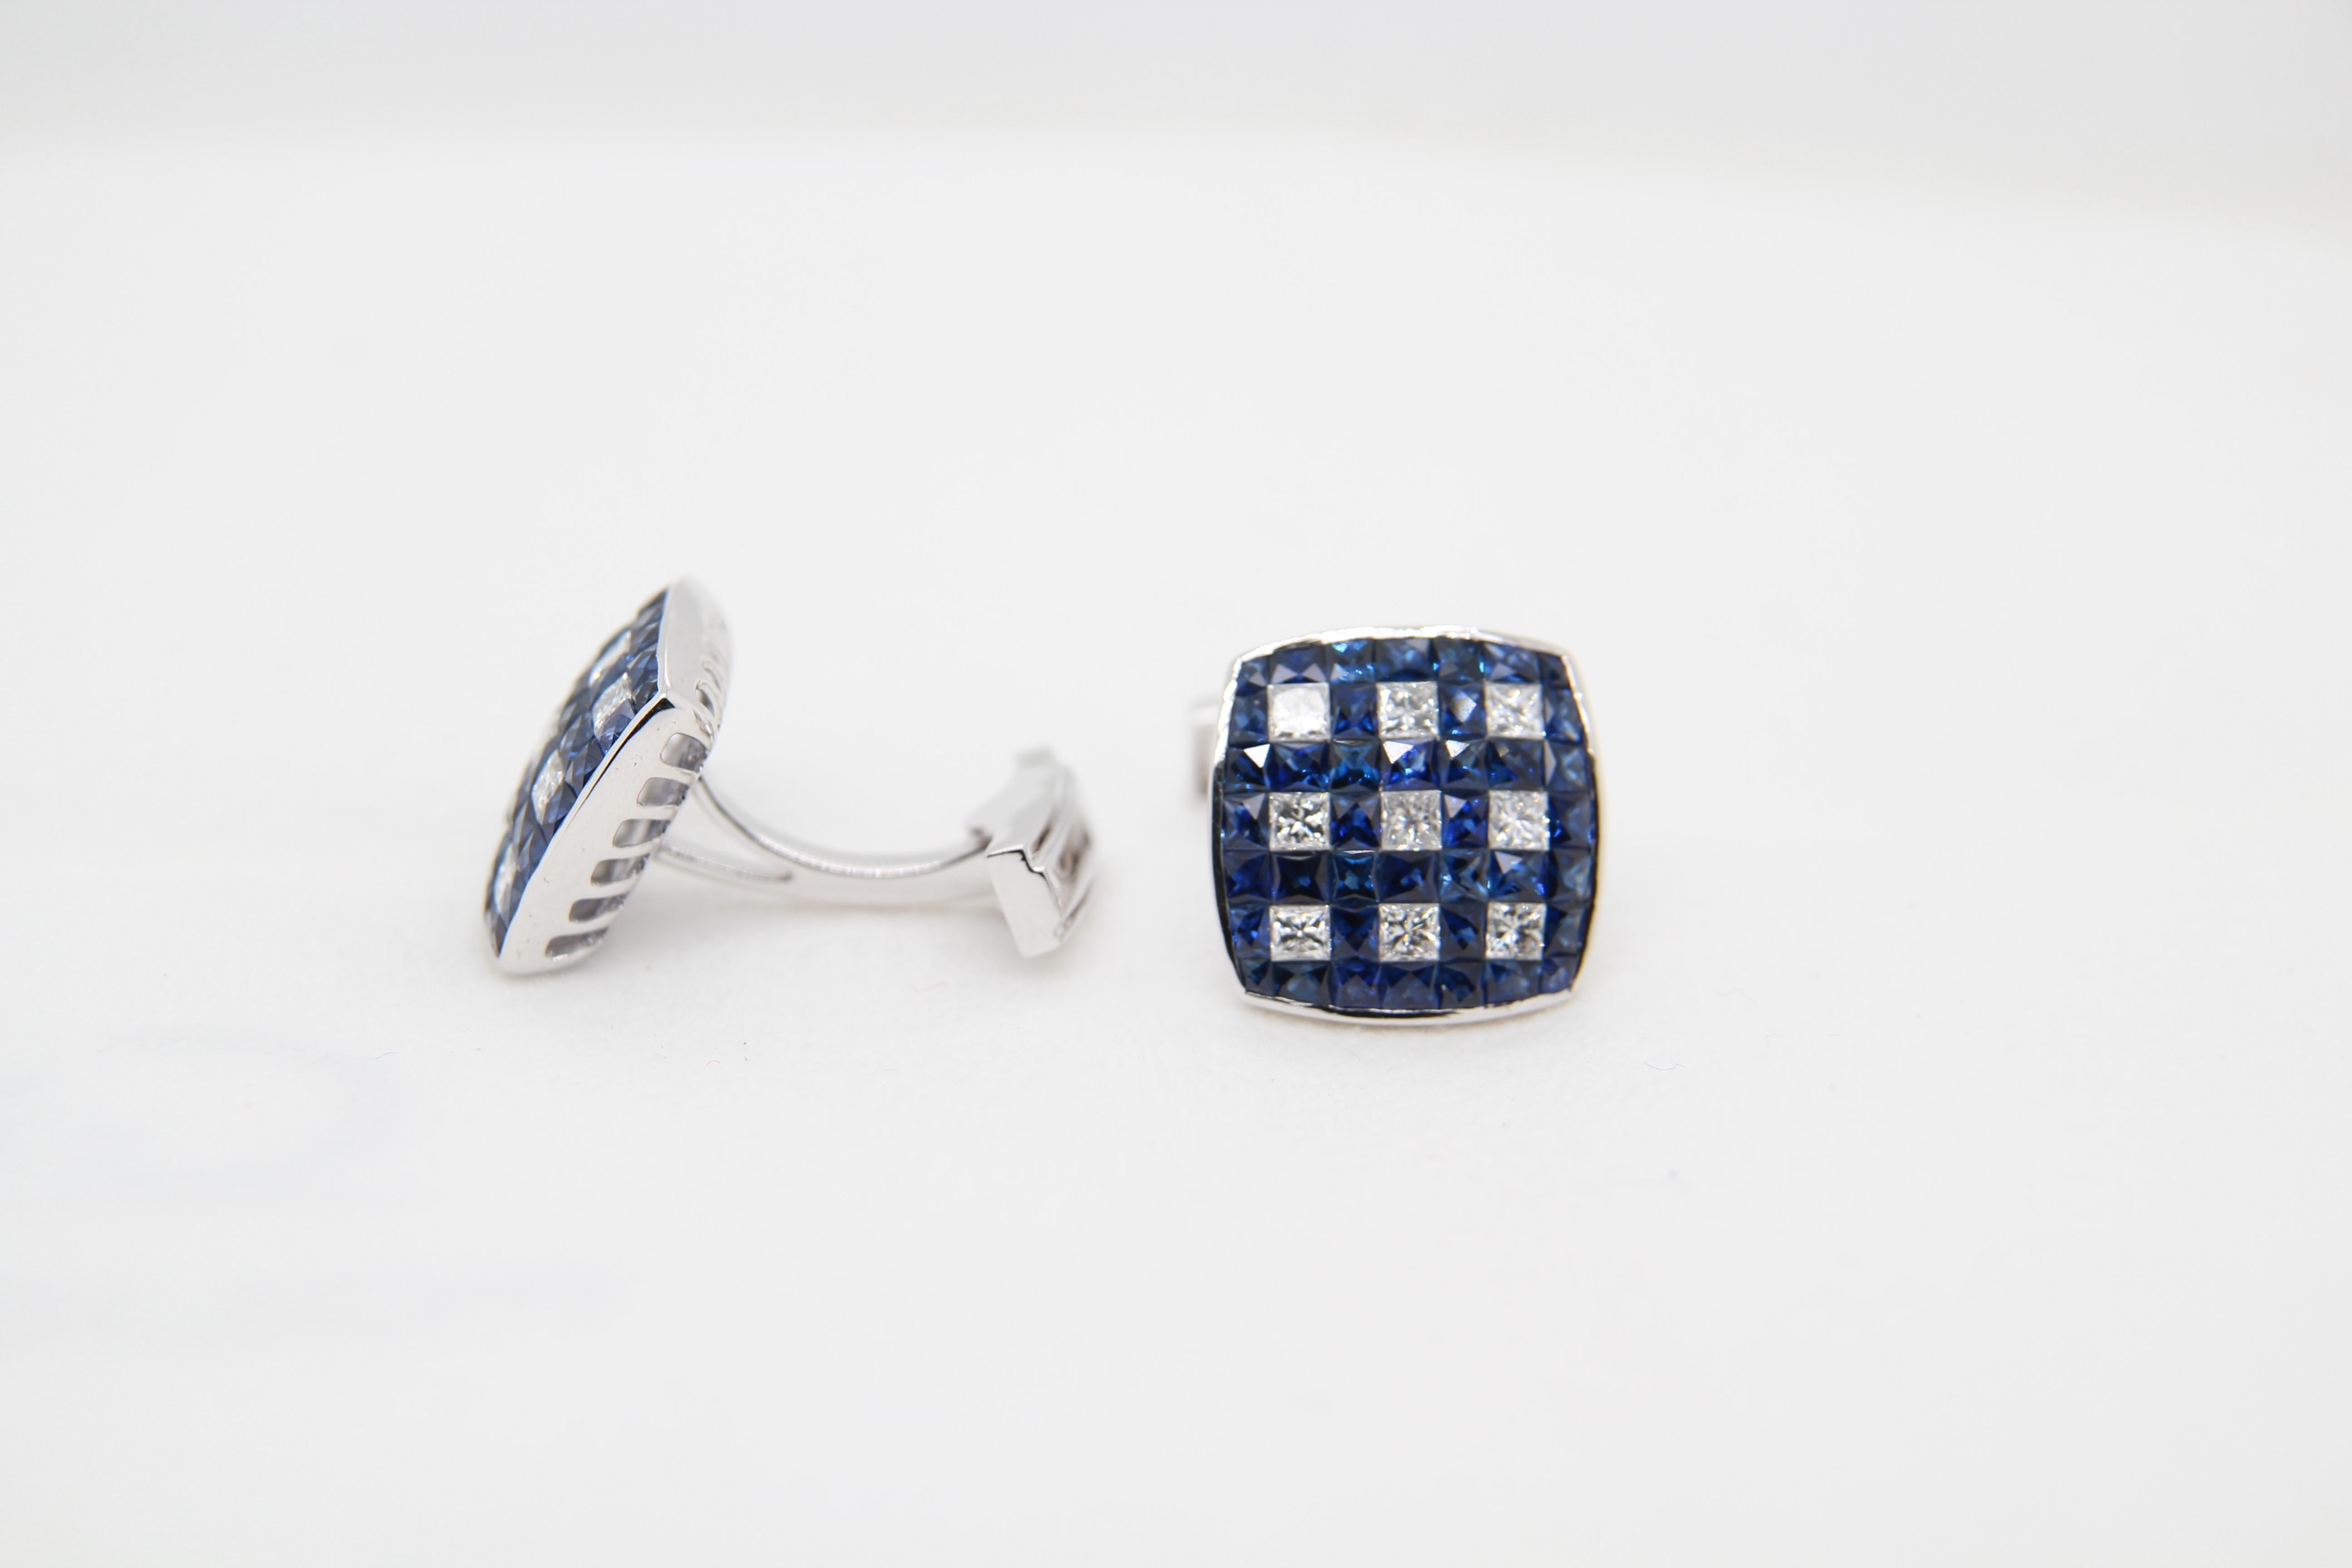 A brand new handcrafted blue sapphire and diamond cufflinks in 14 Karat gold. The total blue sapphire weight is 5.58 carats, diamond weight is 1.47 carats and gross weight is 9.92 grams. This is the large size, there is also another smaller size